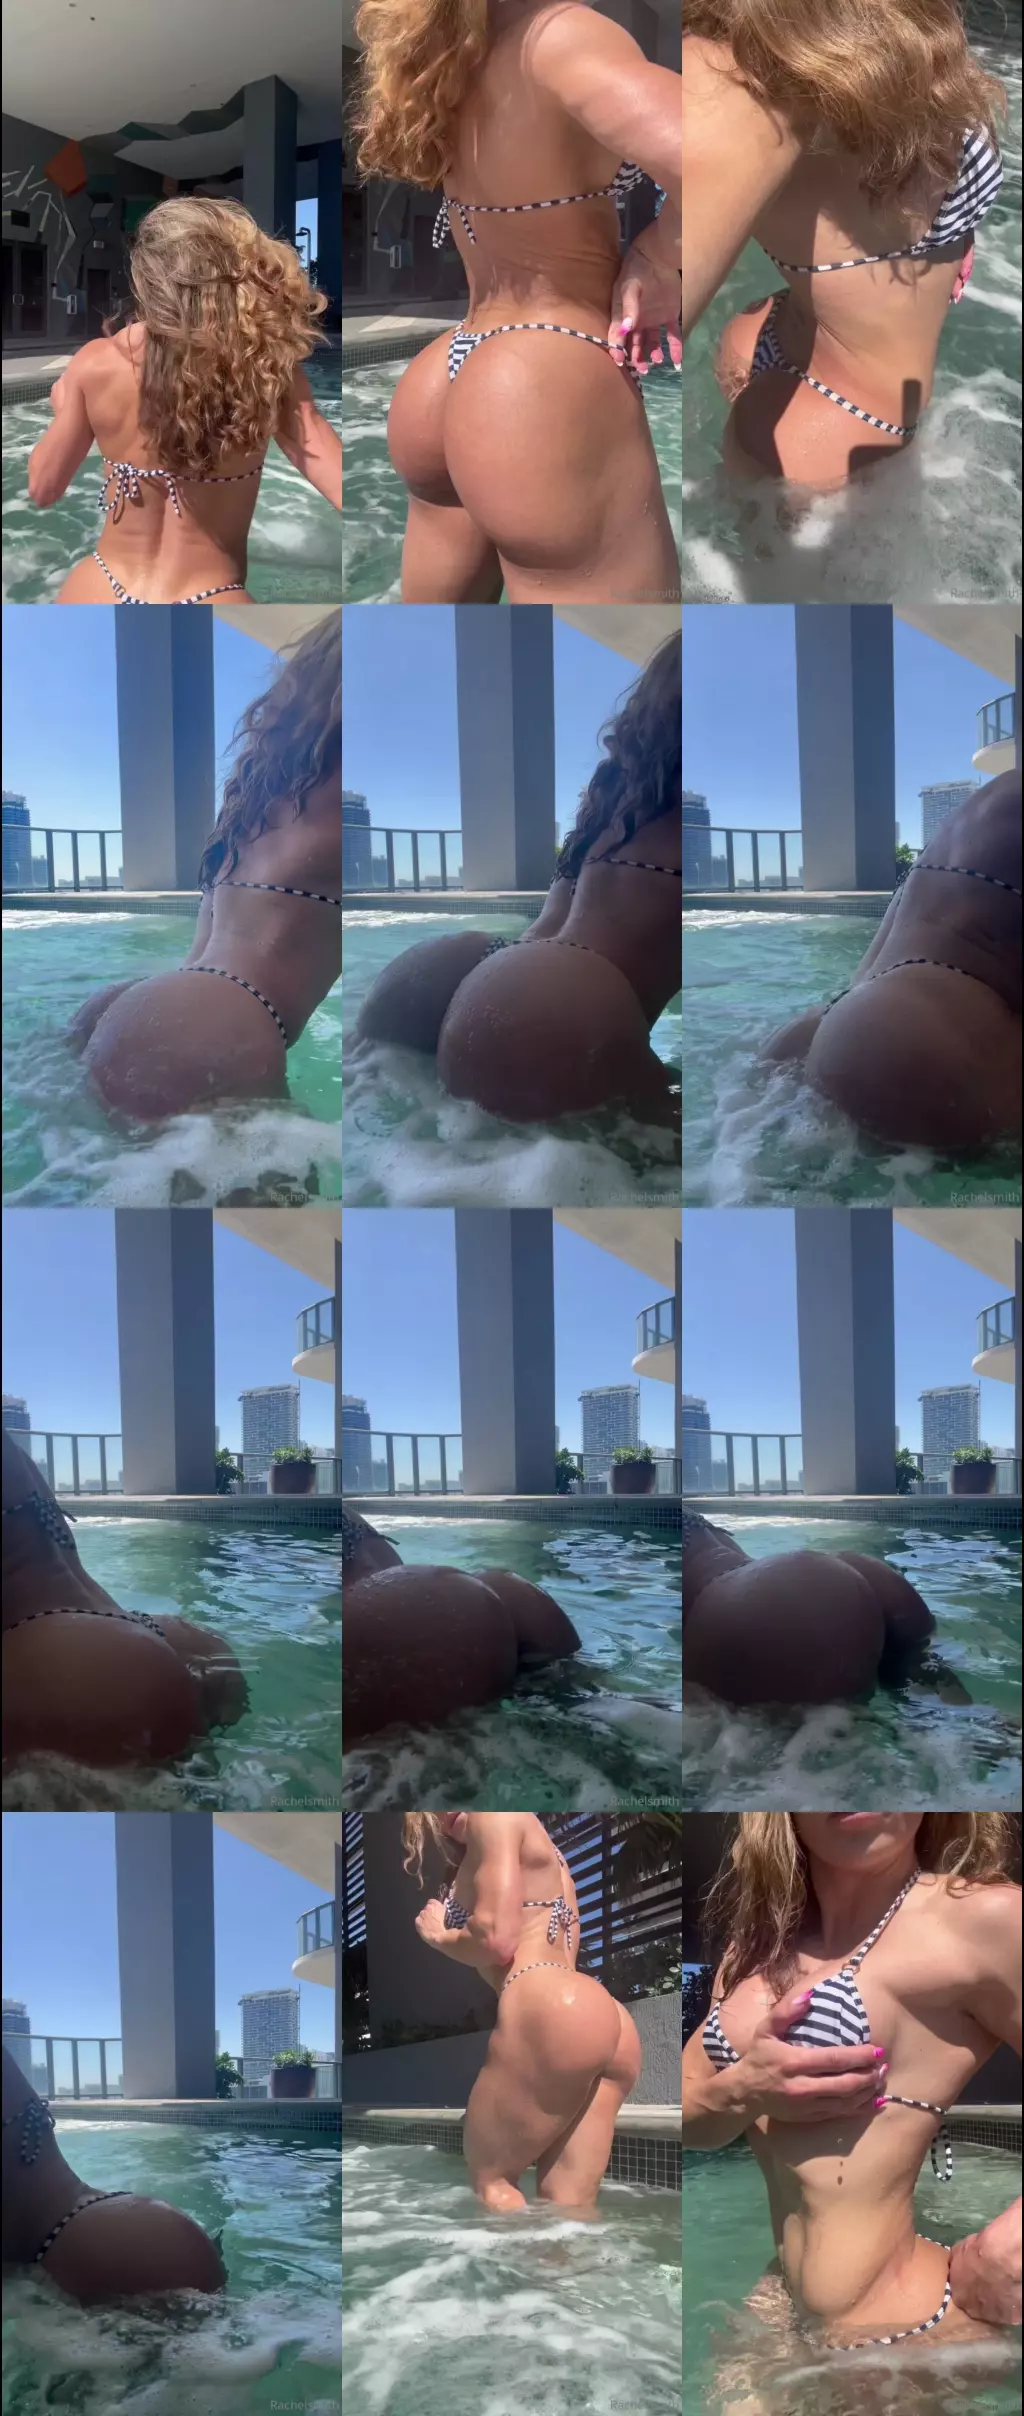 Sunnyandrews At The Pool Horny